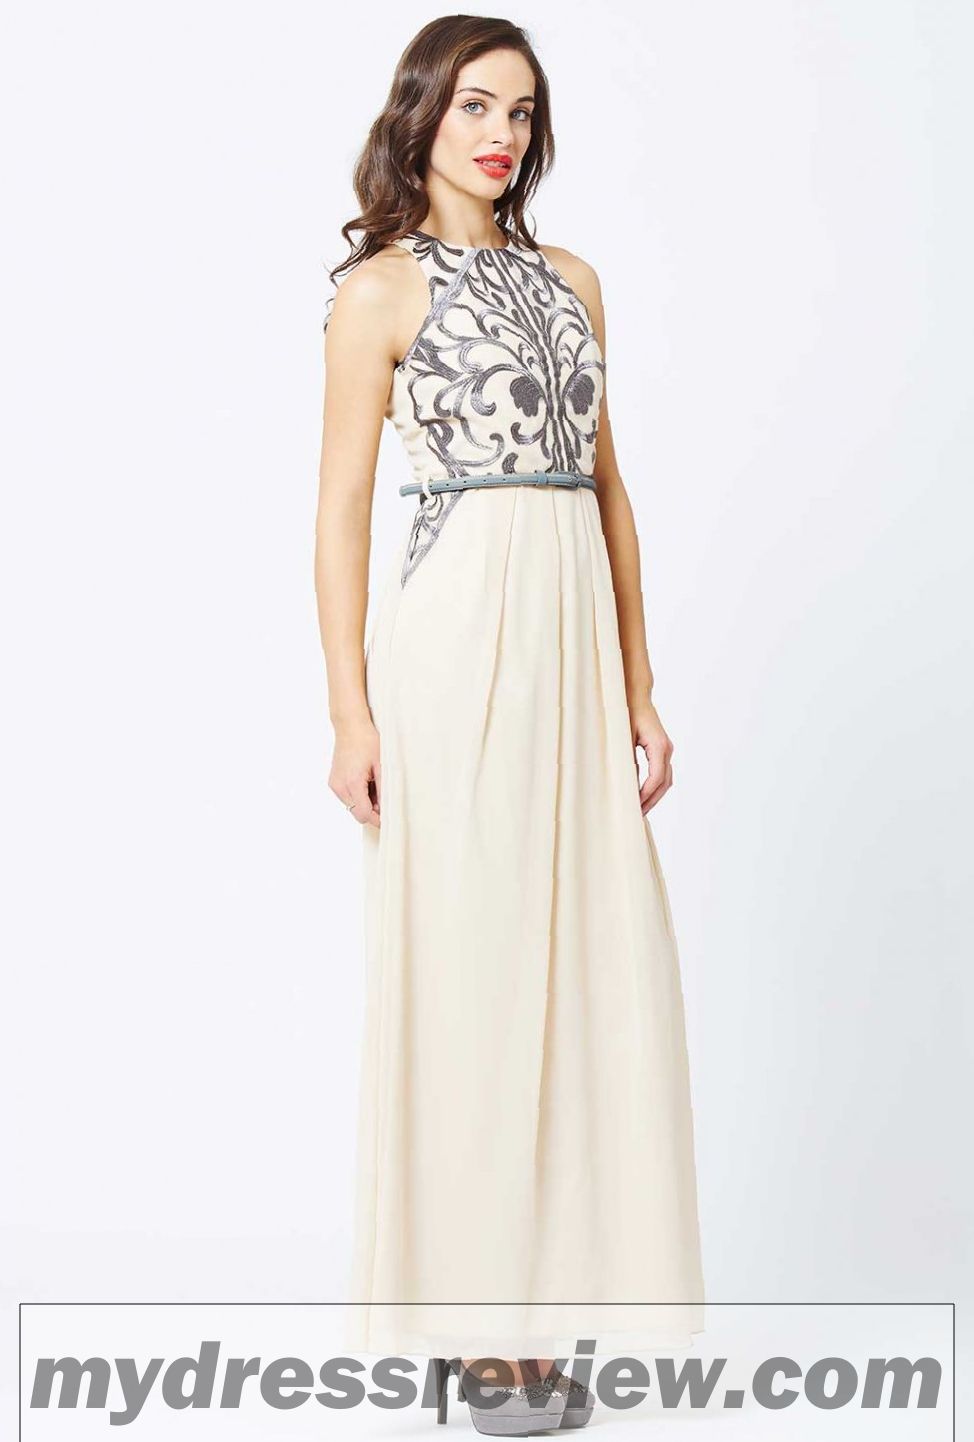 Maxi Dresses For Small Height : Make You Look Like A Princess